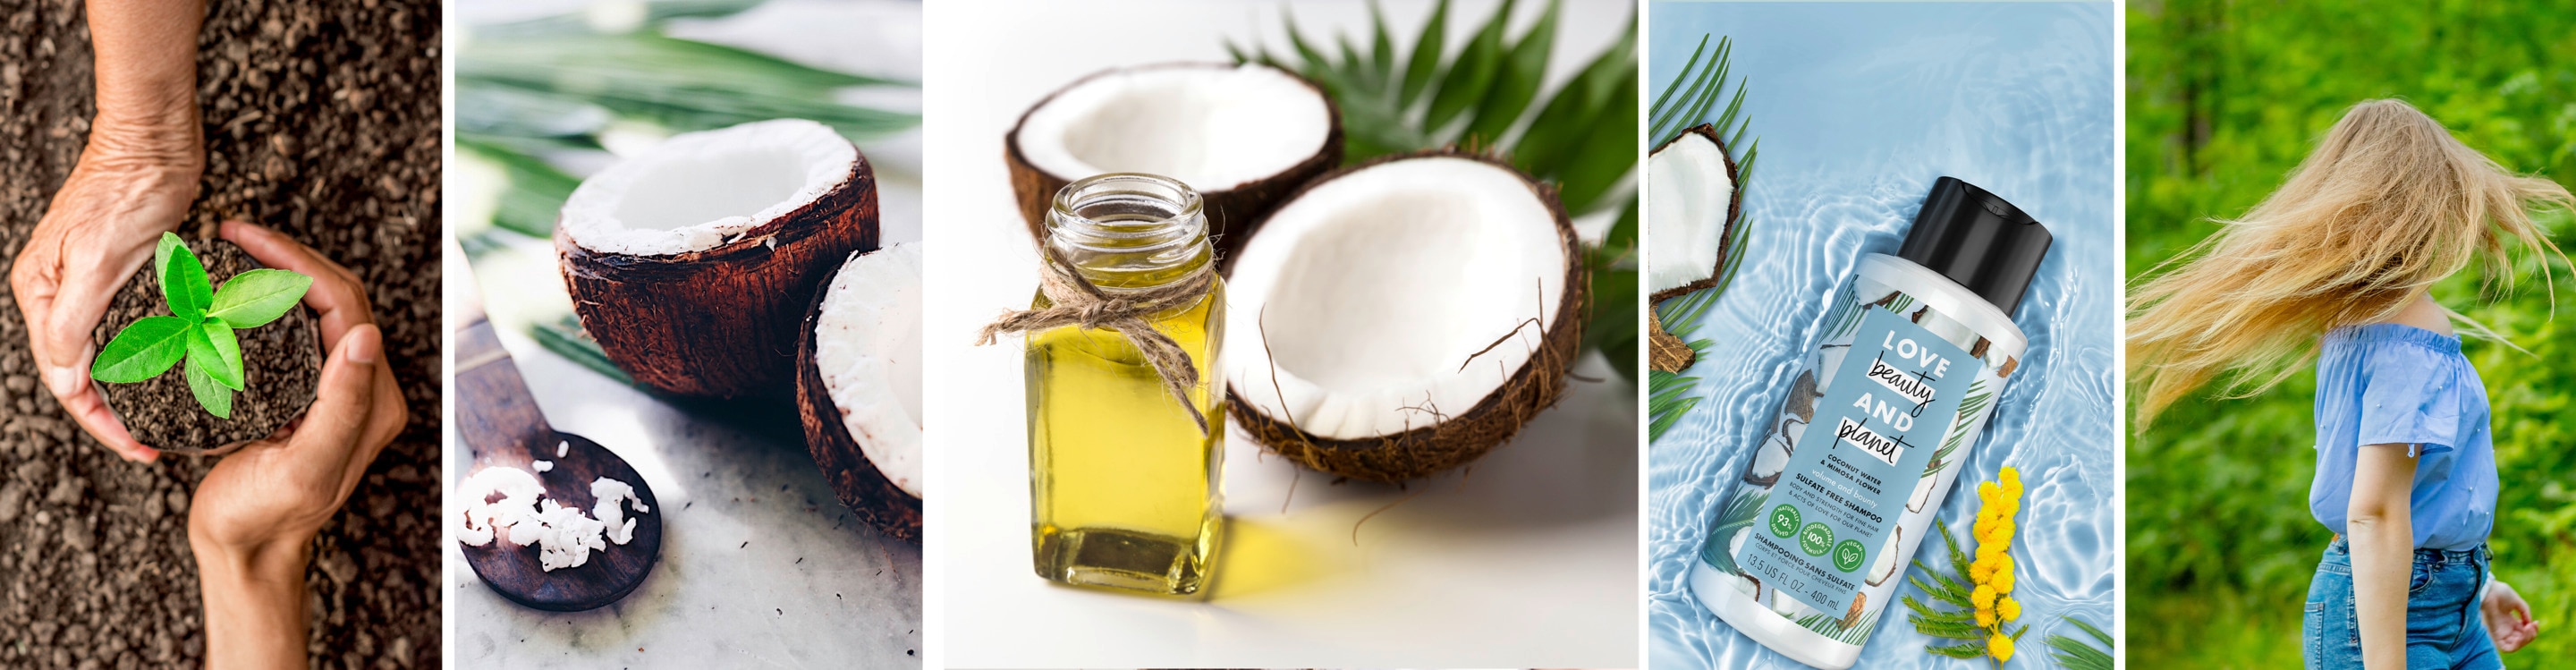 benefits of coconut oil for hair